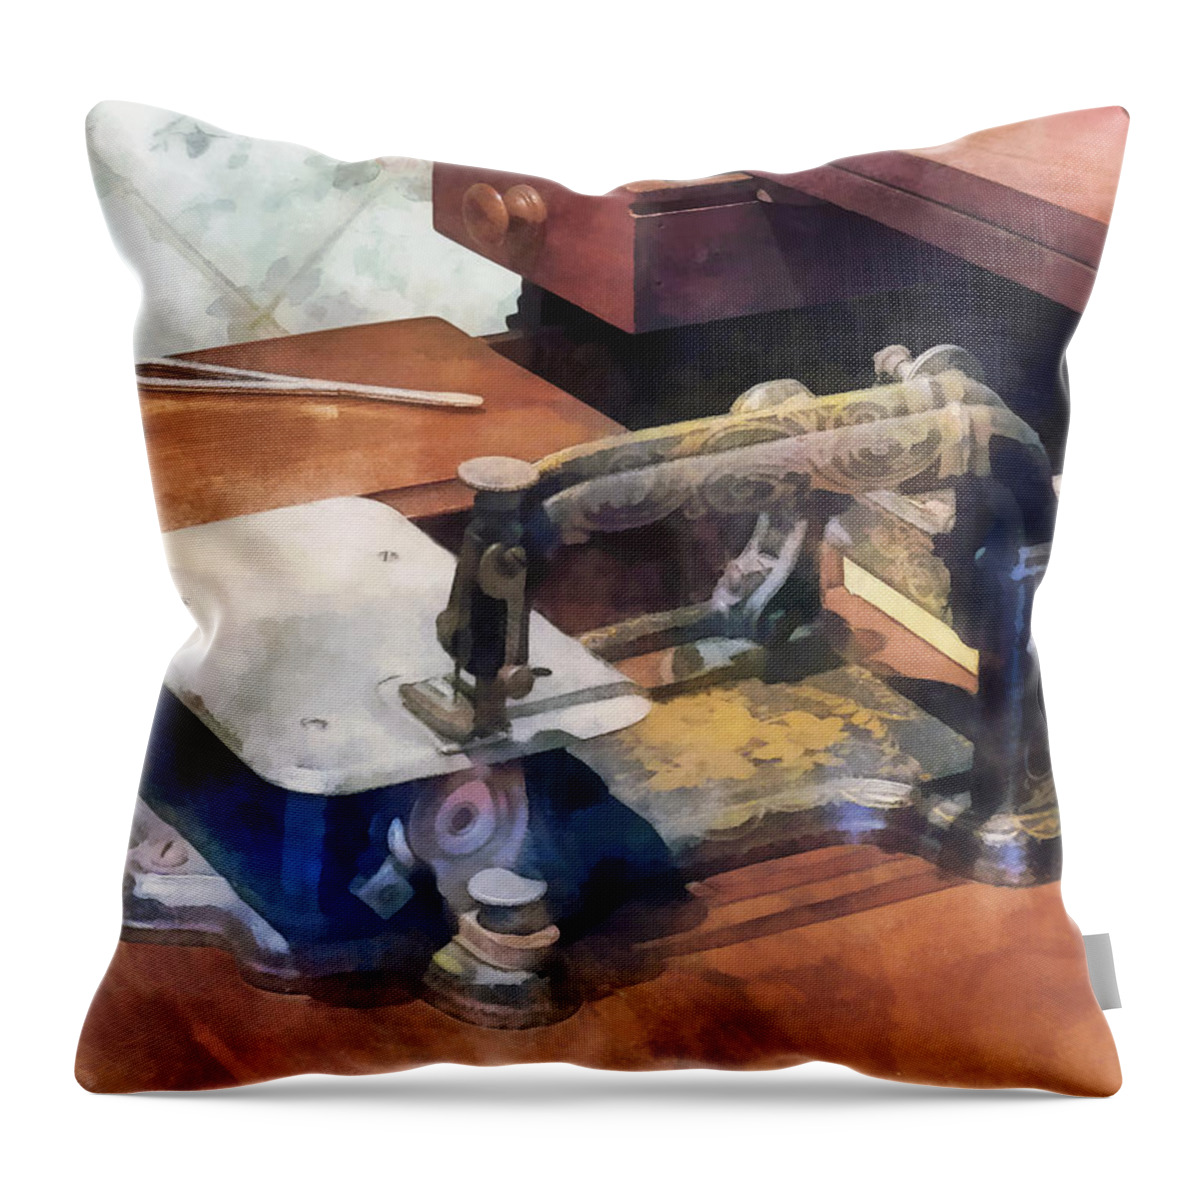 Sewing Machine Throw Pillow featuring the photograph Wheeler and Wilson Sewing Machine Circa 1850 by Susan Savad